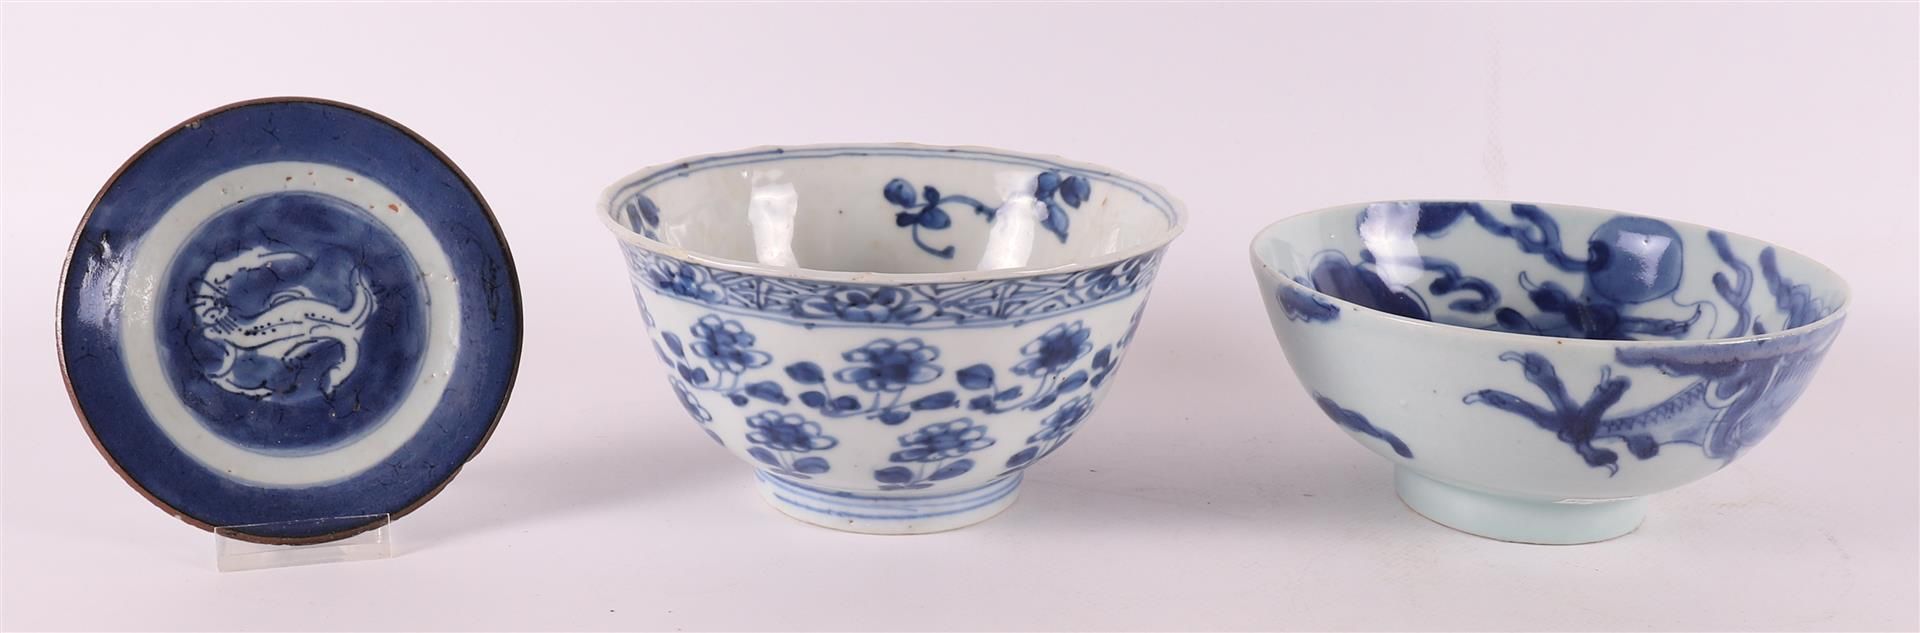 A blue and white porcelain bowl on a stand ring, China, Kangxi, around 1700.